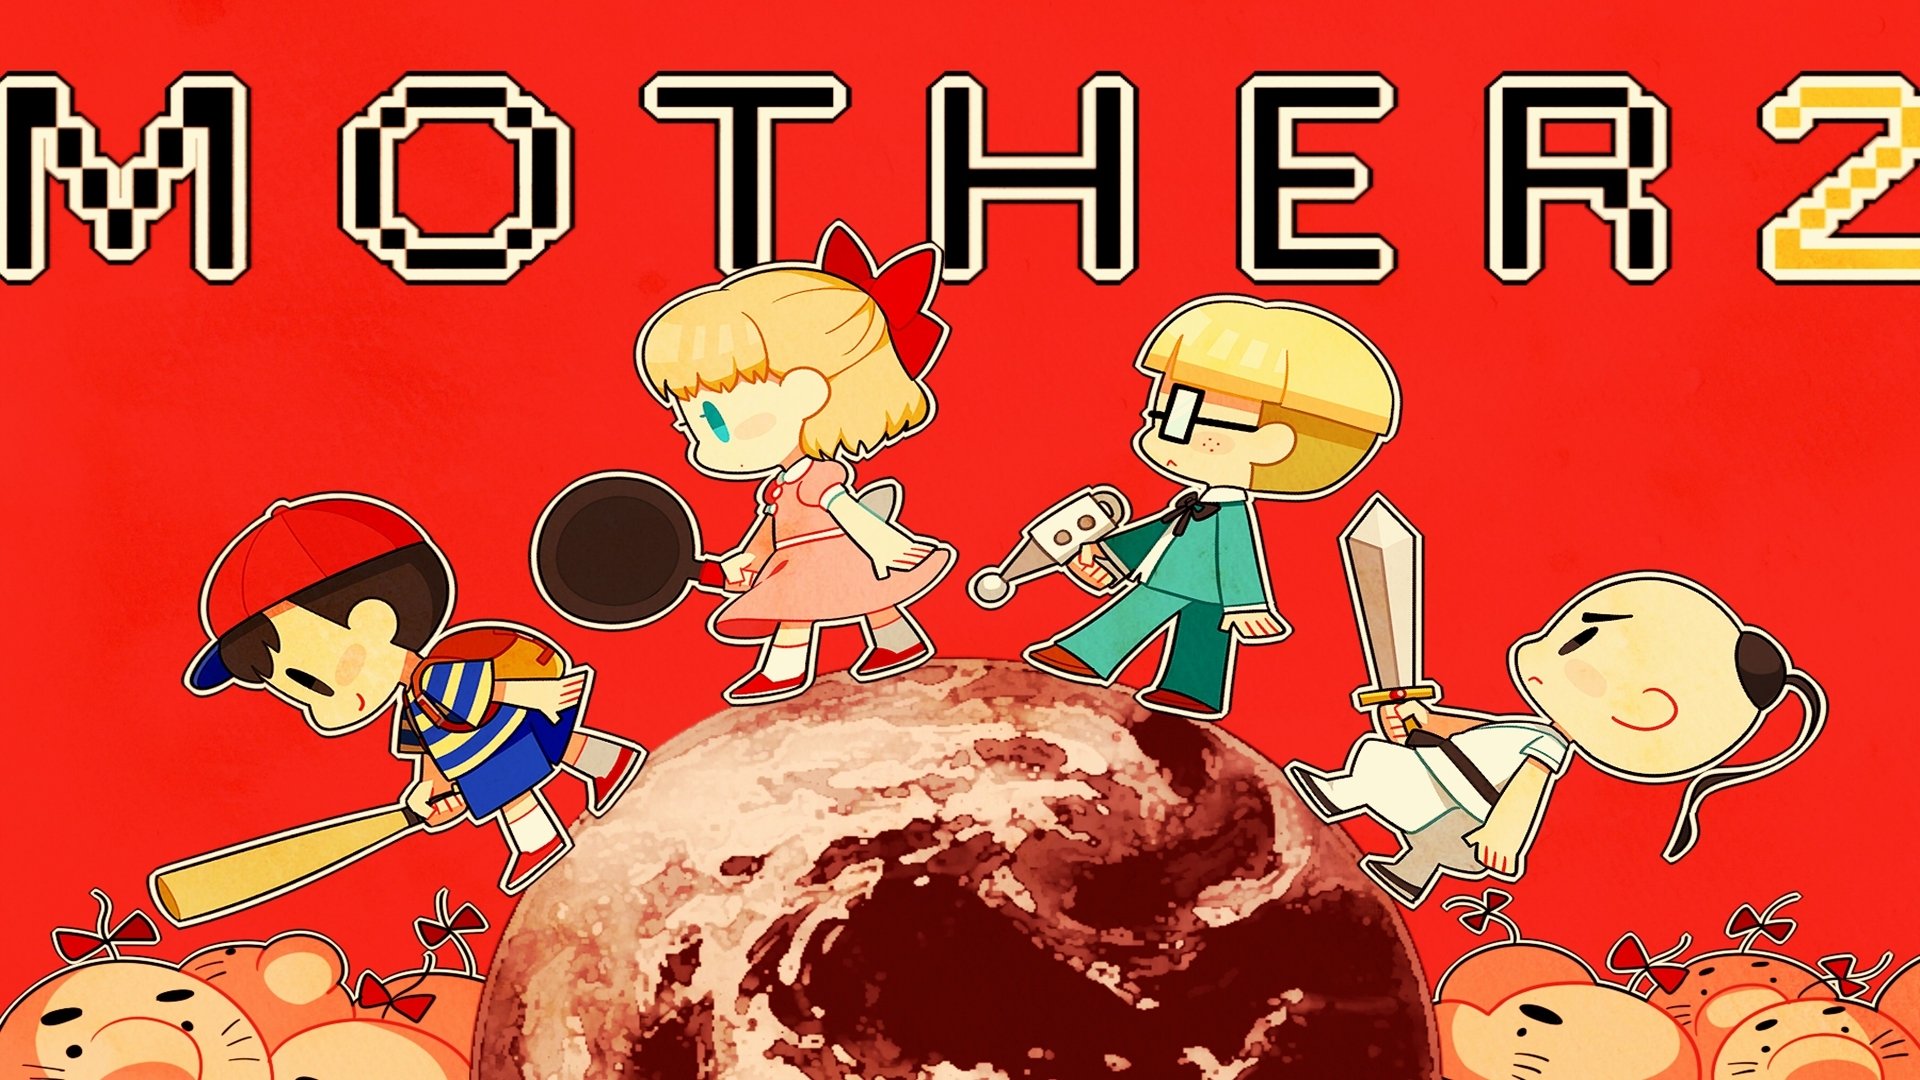 download earthbound mother 2